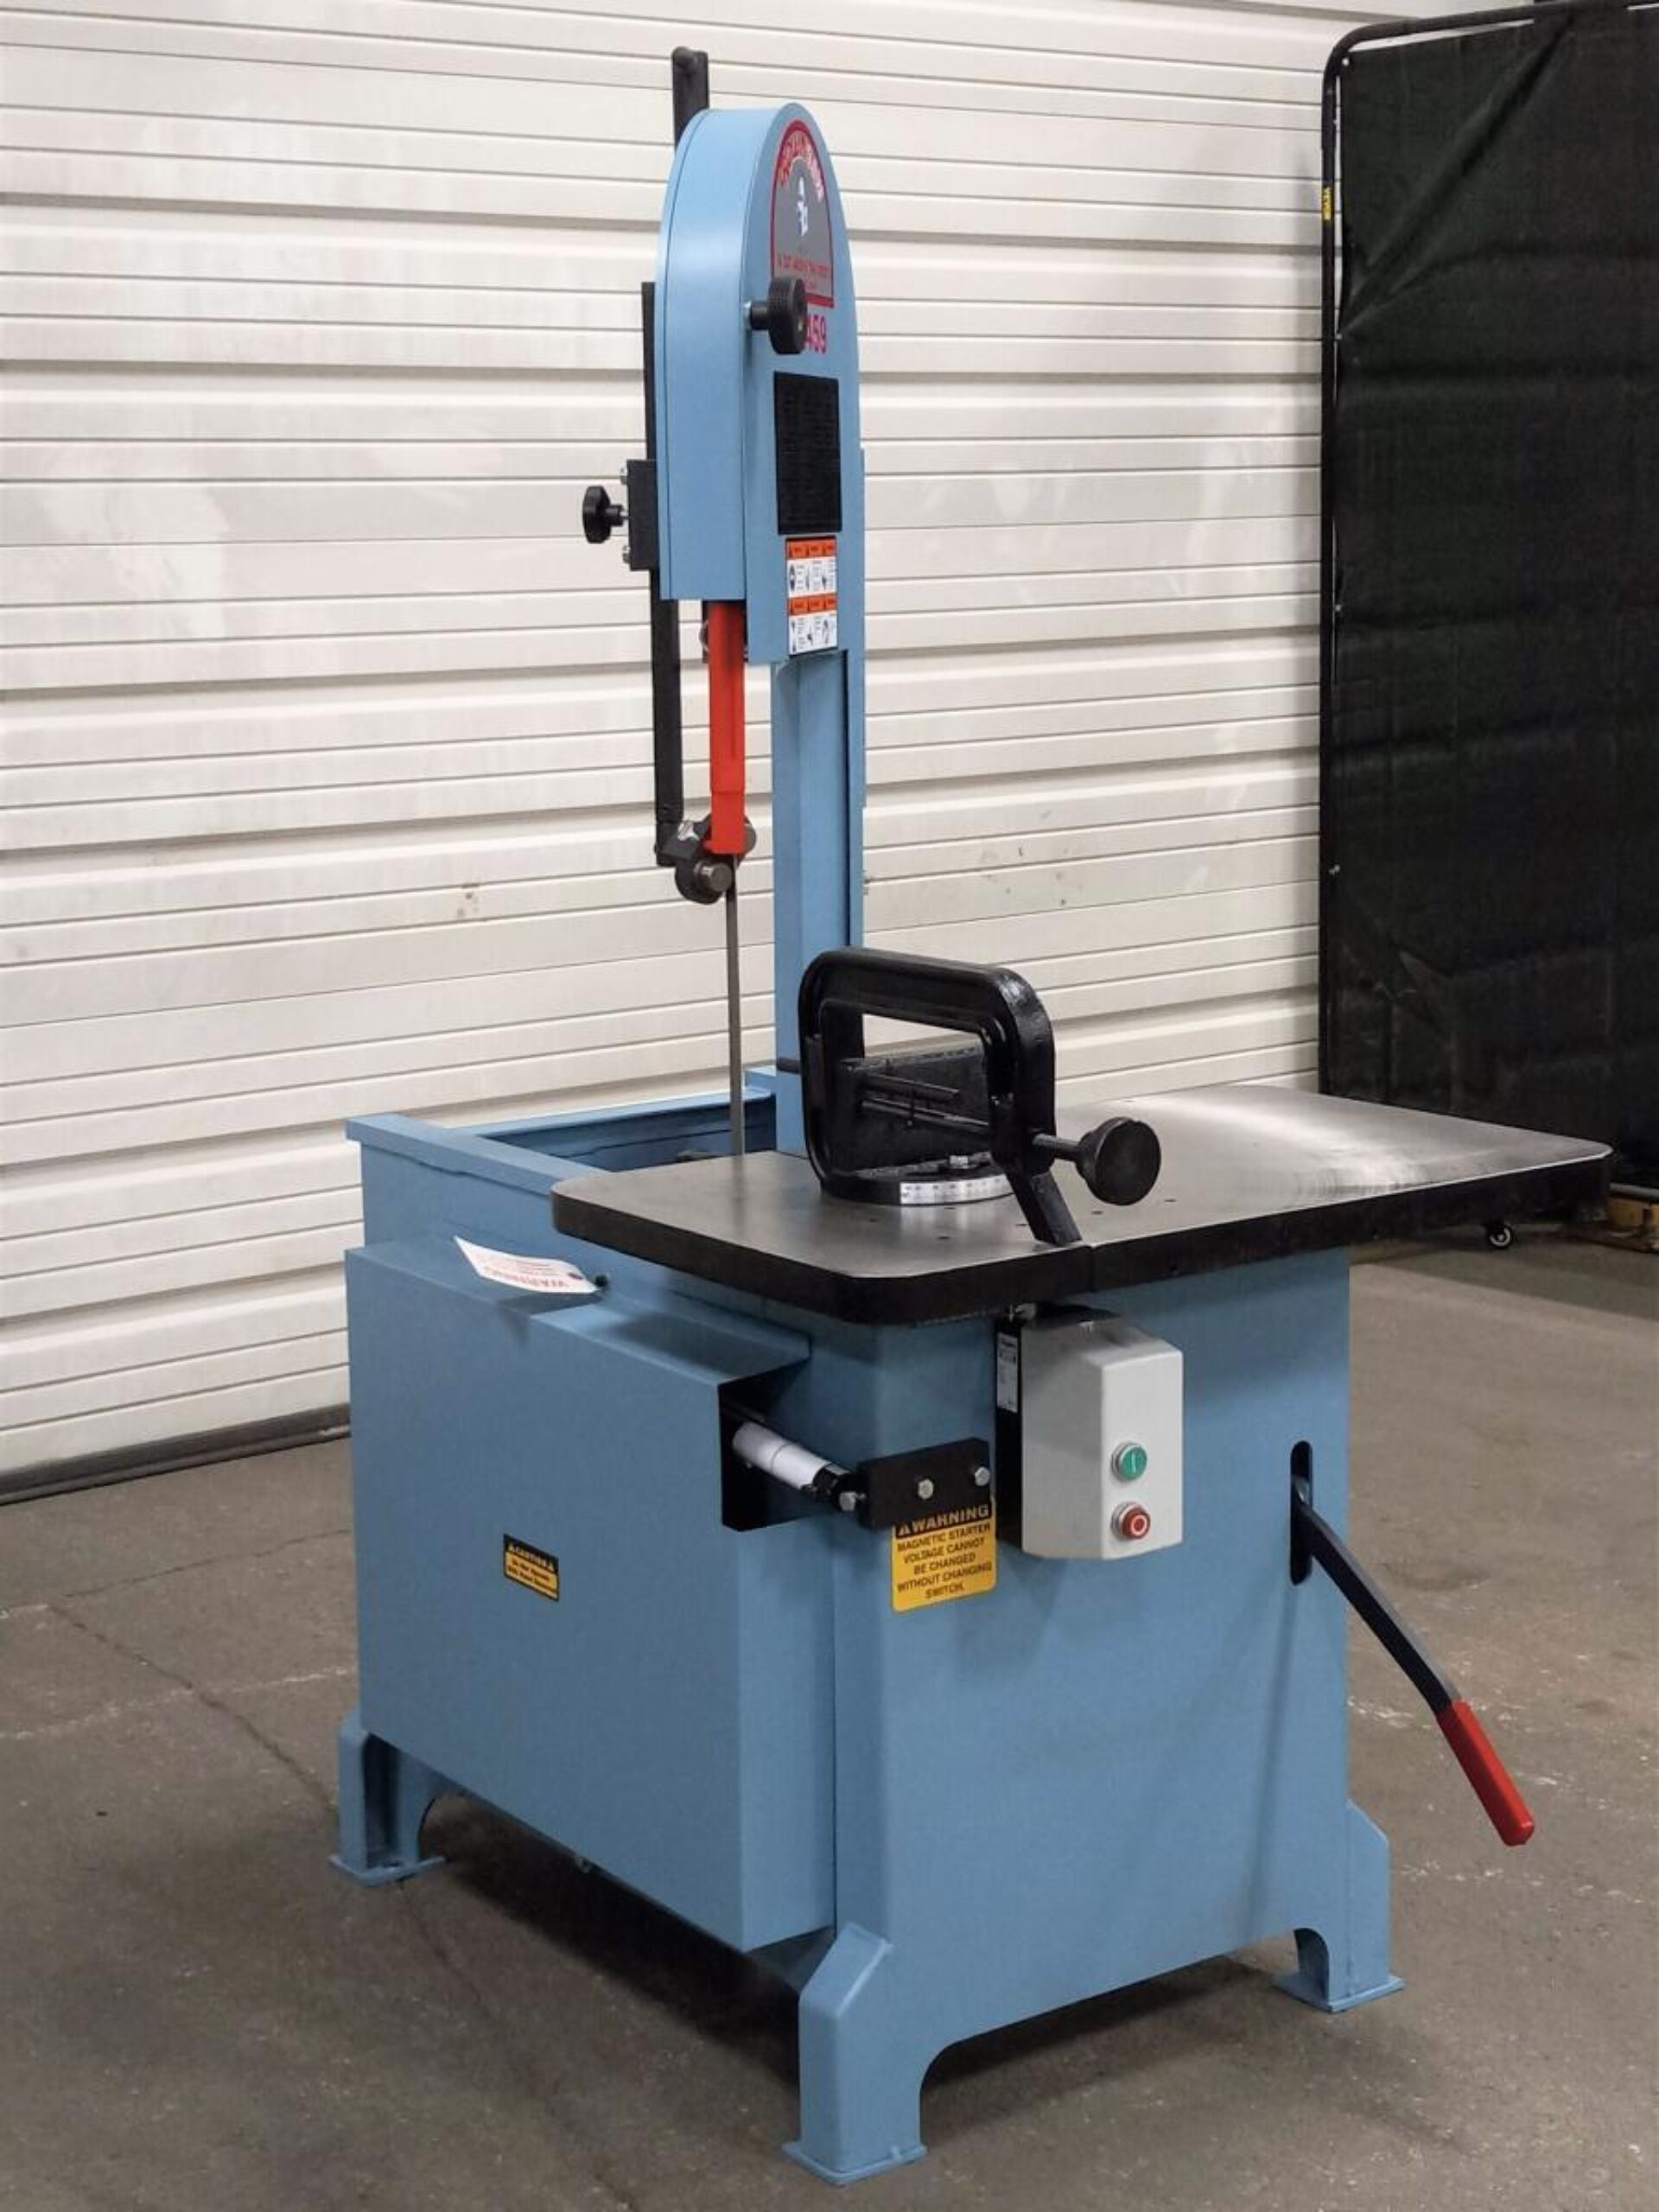 Additional image for 14.5'' Roll-In-Saw #EF1459 - AMROLLSAW2